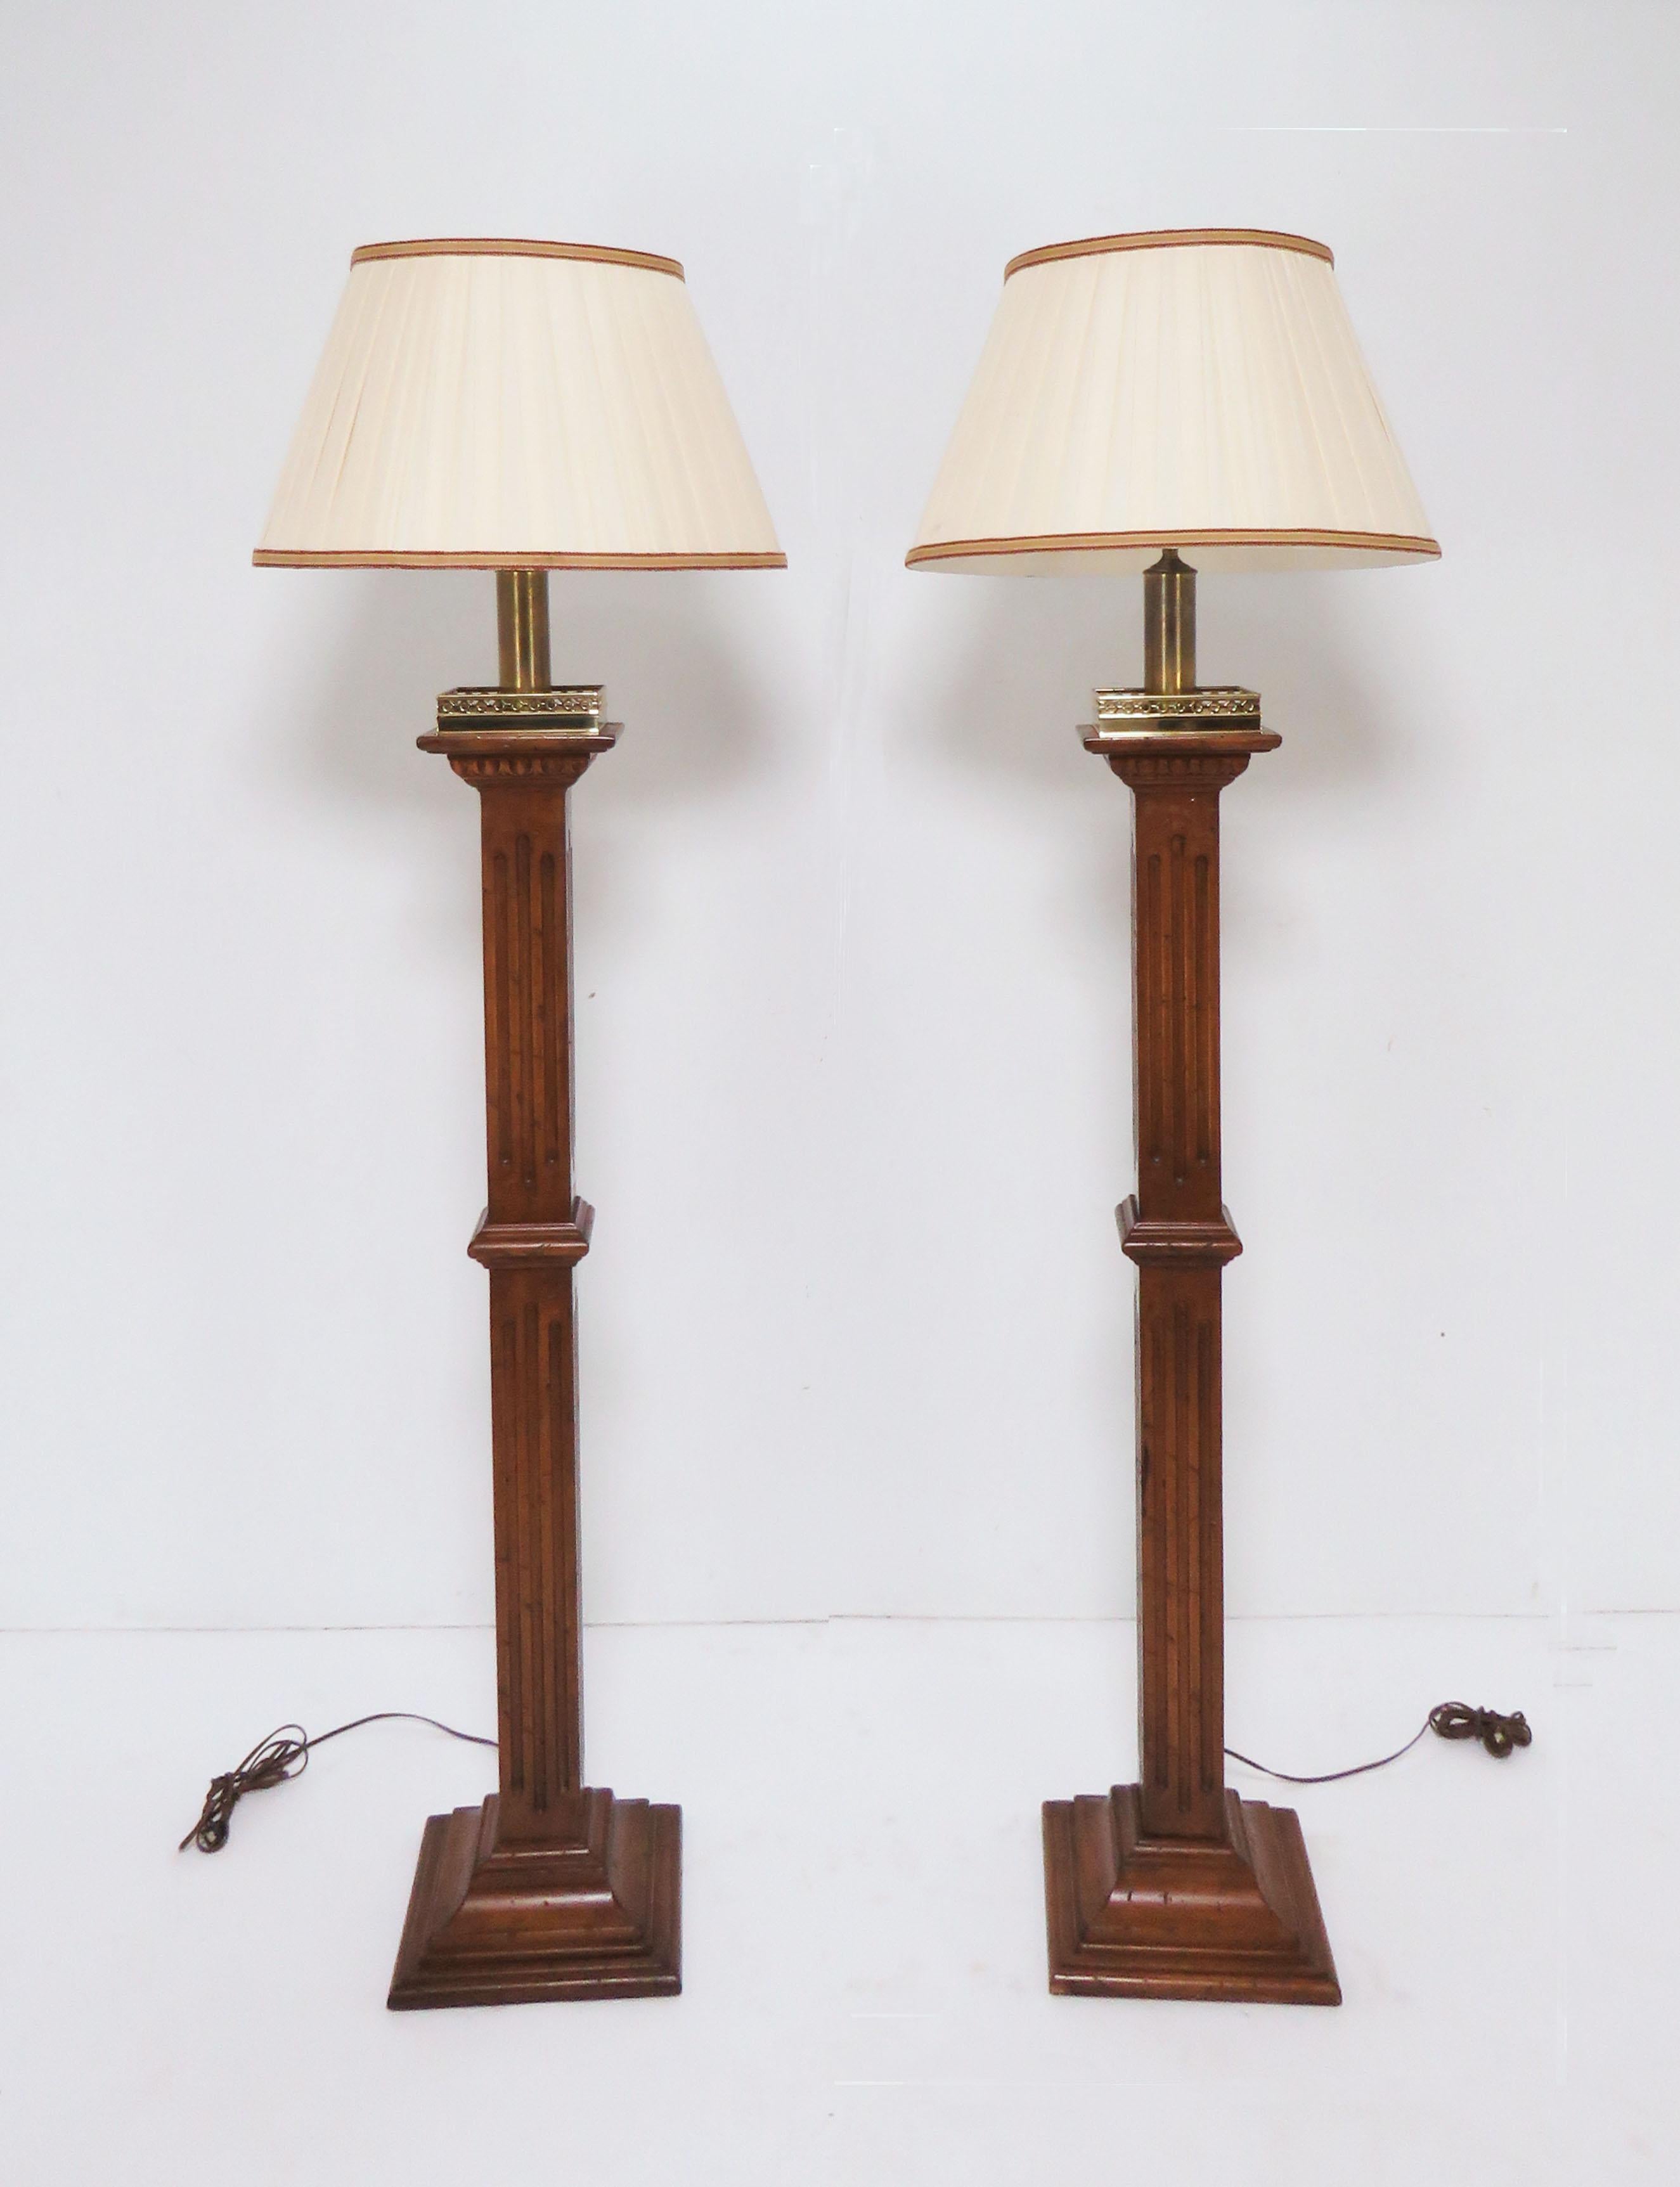 A unique pair of Regency style wooden columnar floor lamps in walnut finish, crowned with solid brass decorative gallery rails, custom made for a Beacon Hill townhouse, circa 1970s. 66